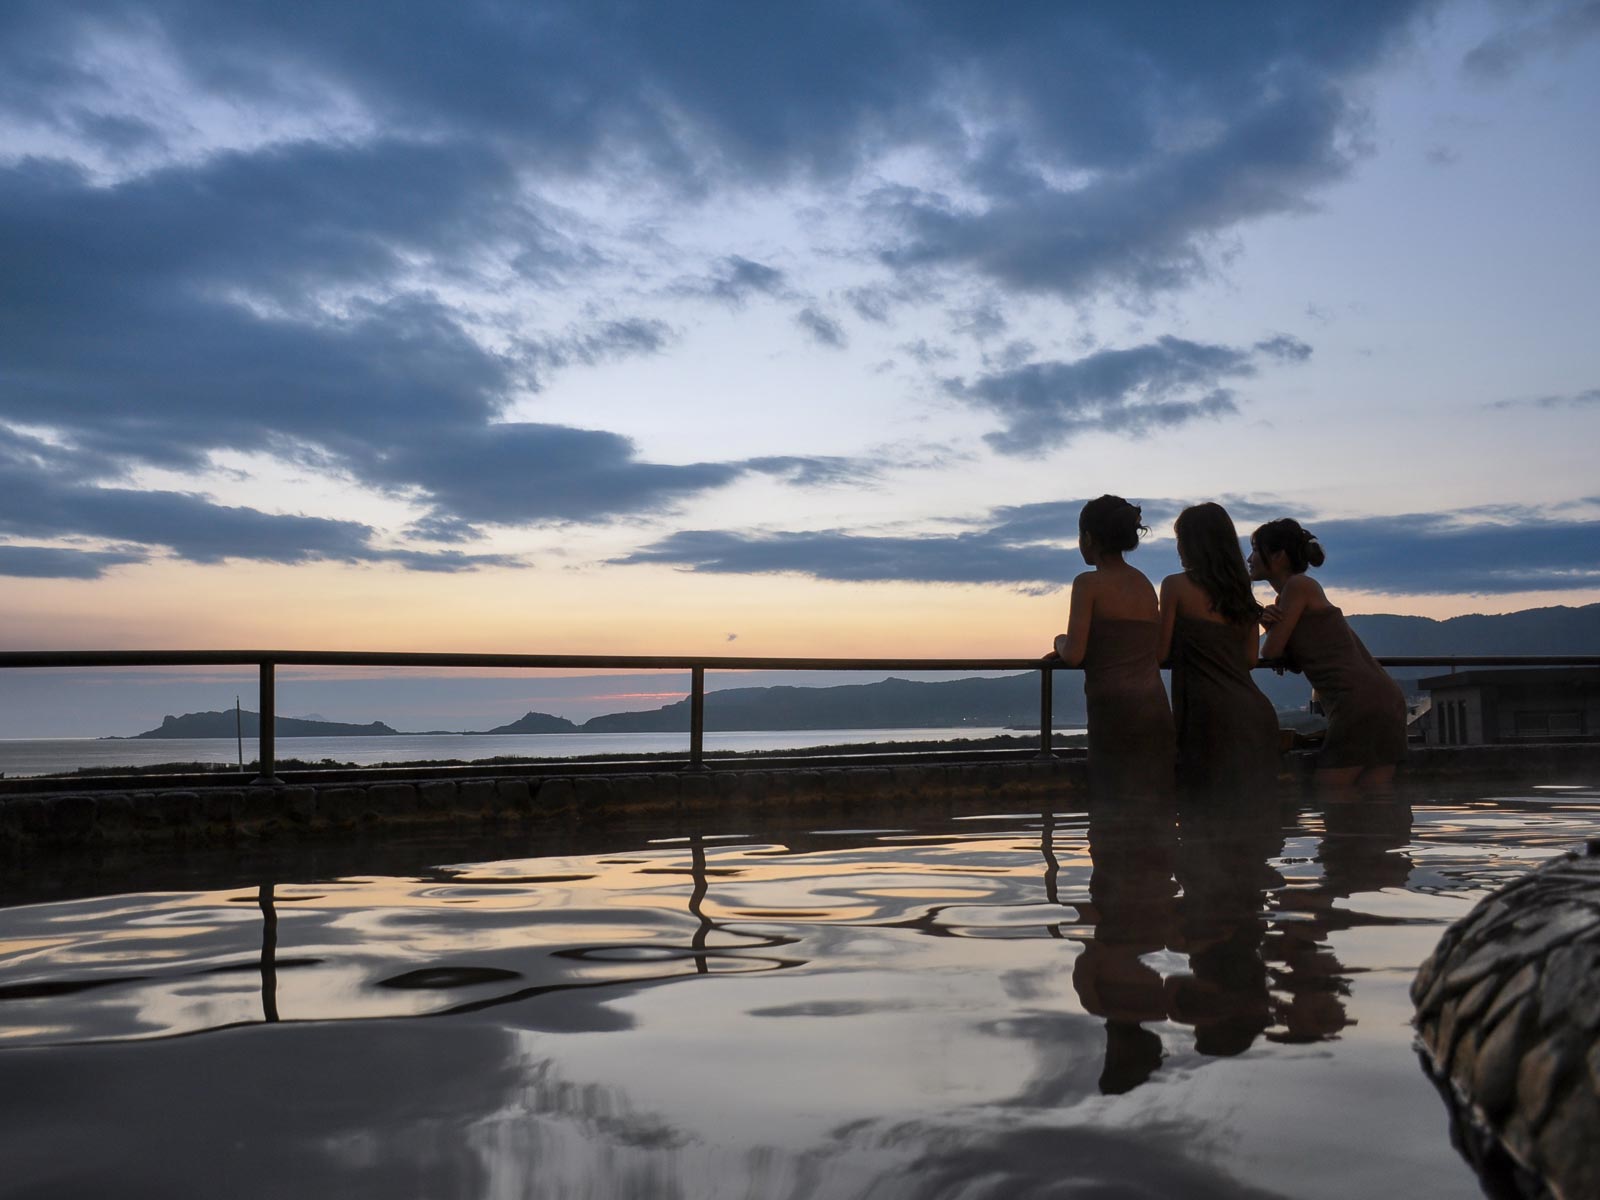 Bathers enjoy an outdoor hot spring while gazing at the ocean during twilight.